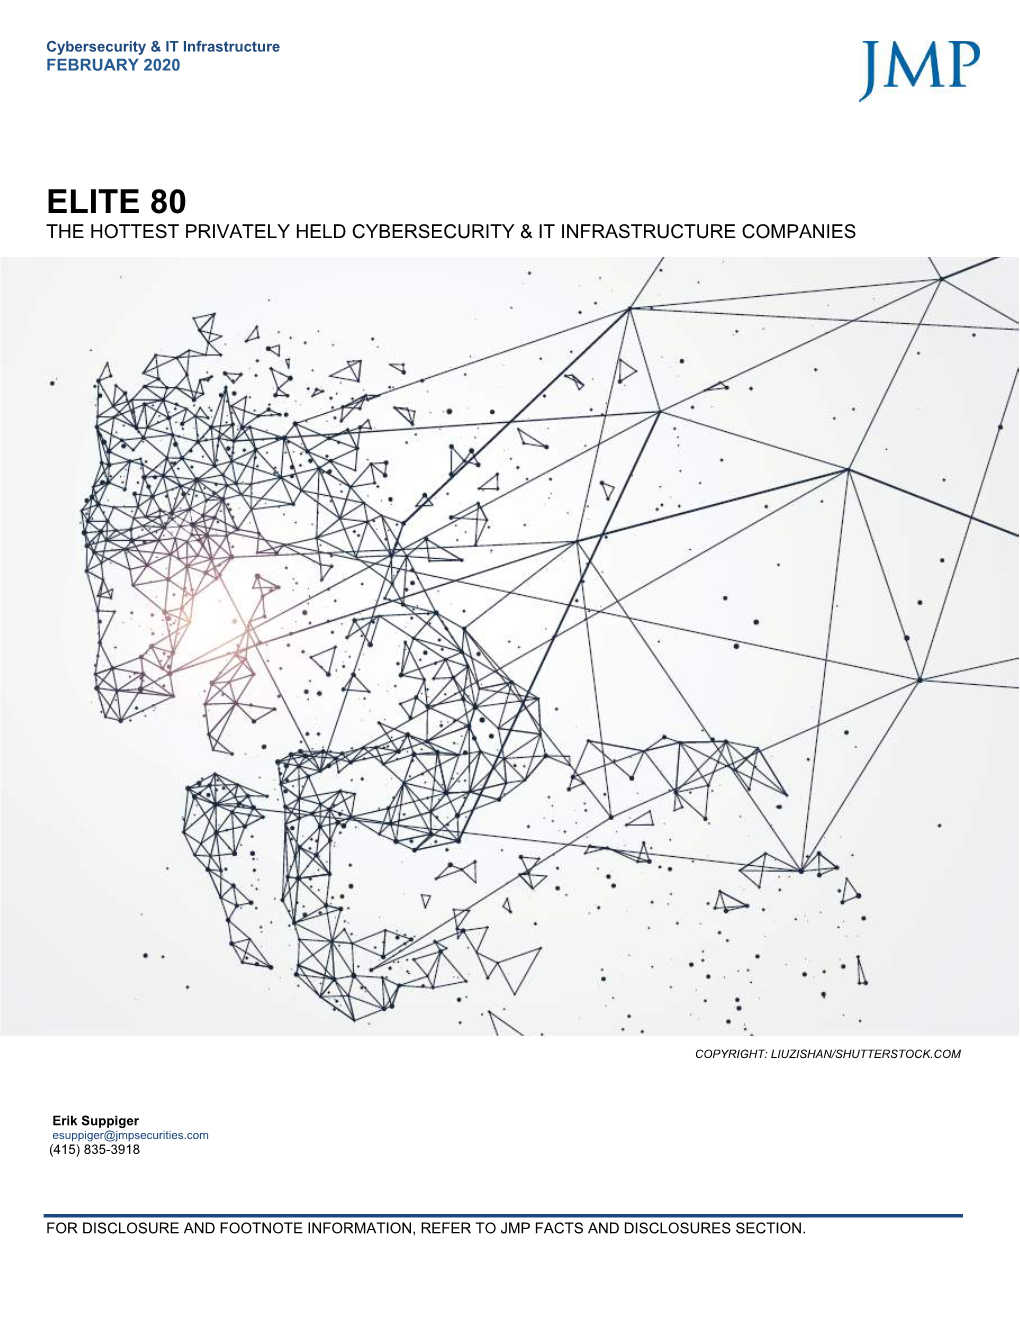 Elite 80 the Hottest Privately Held Cybersecurity & It Infrastructure Companies